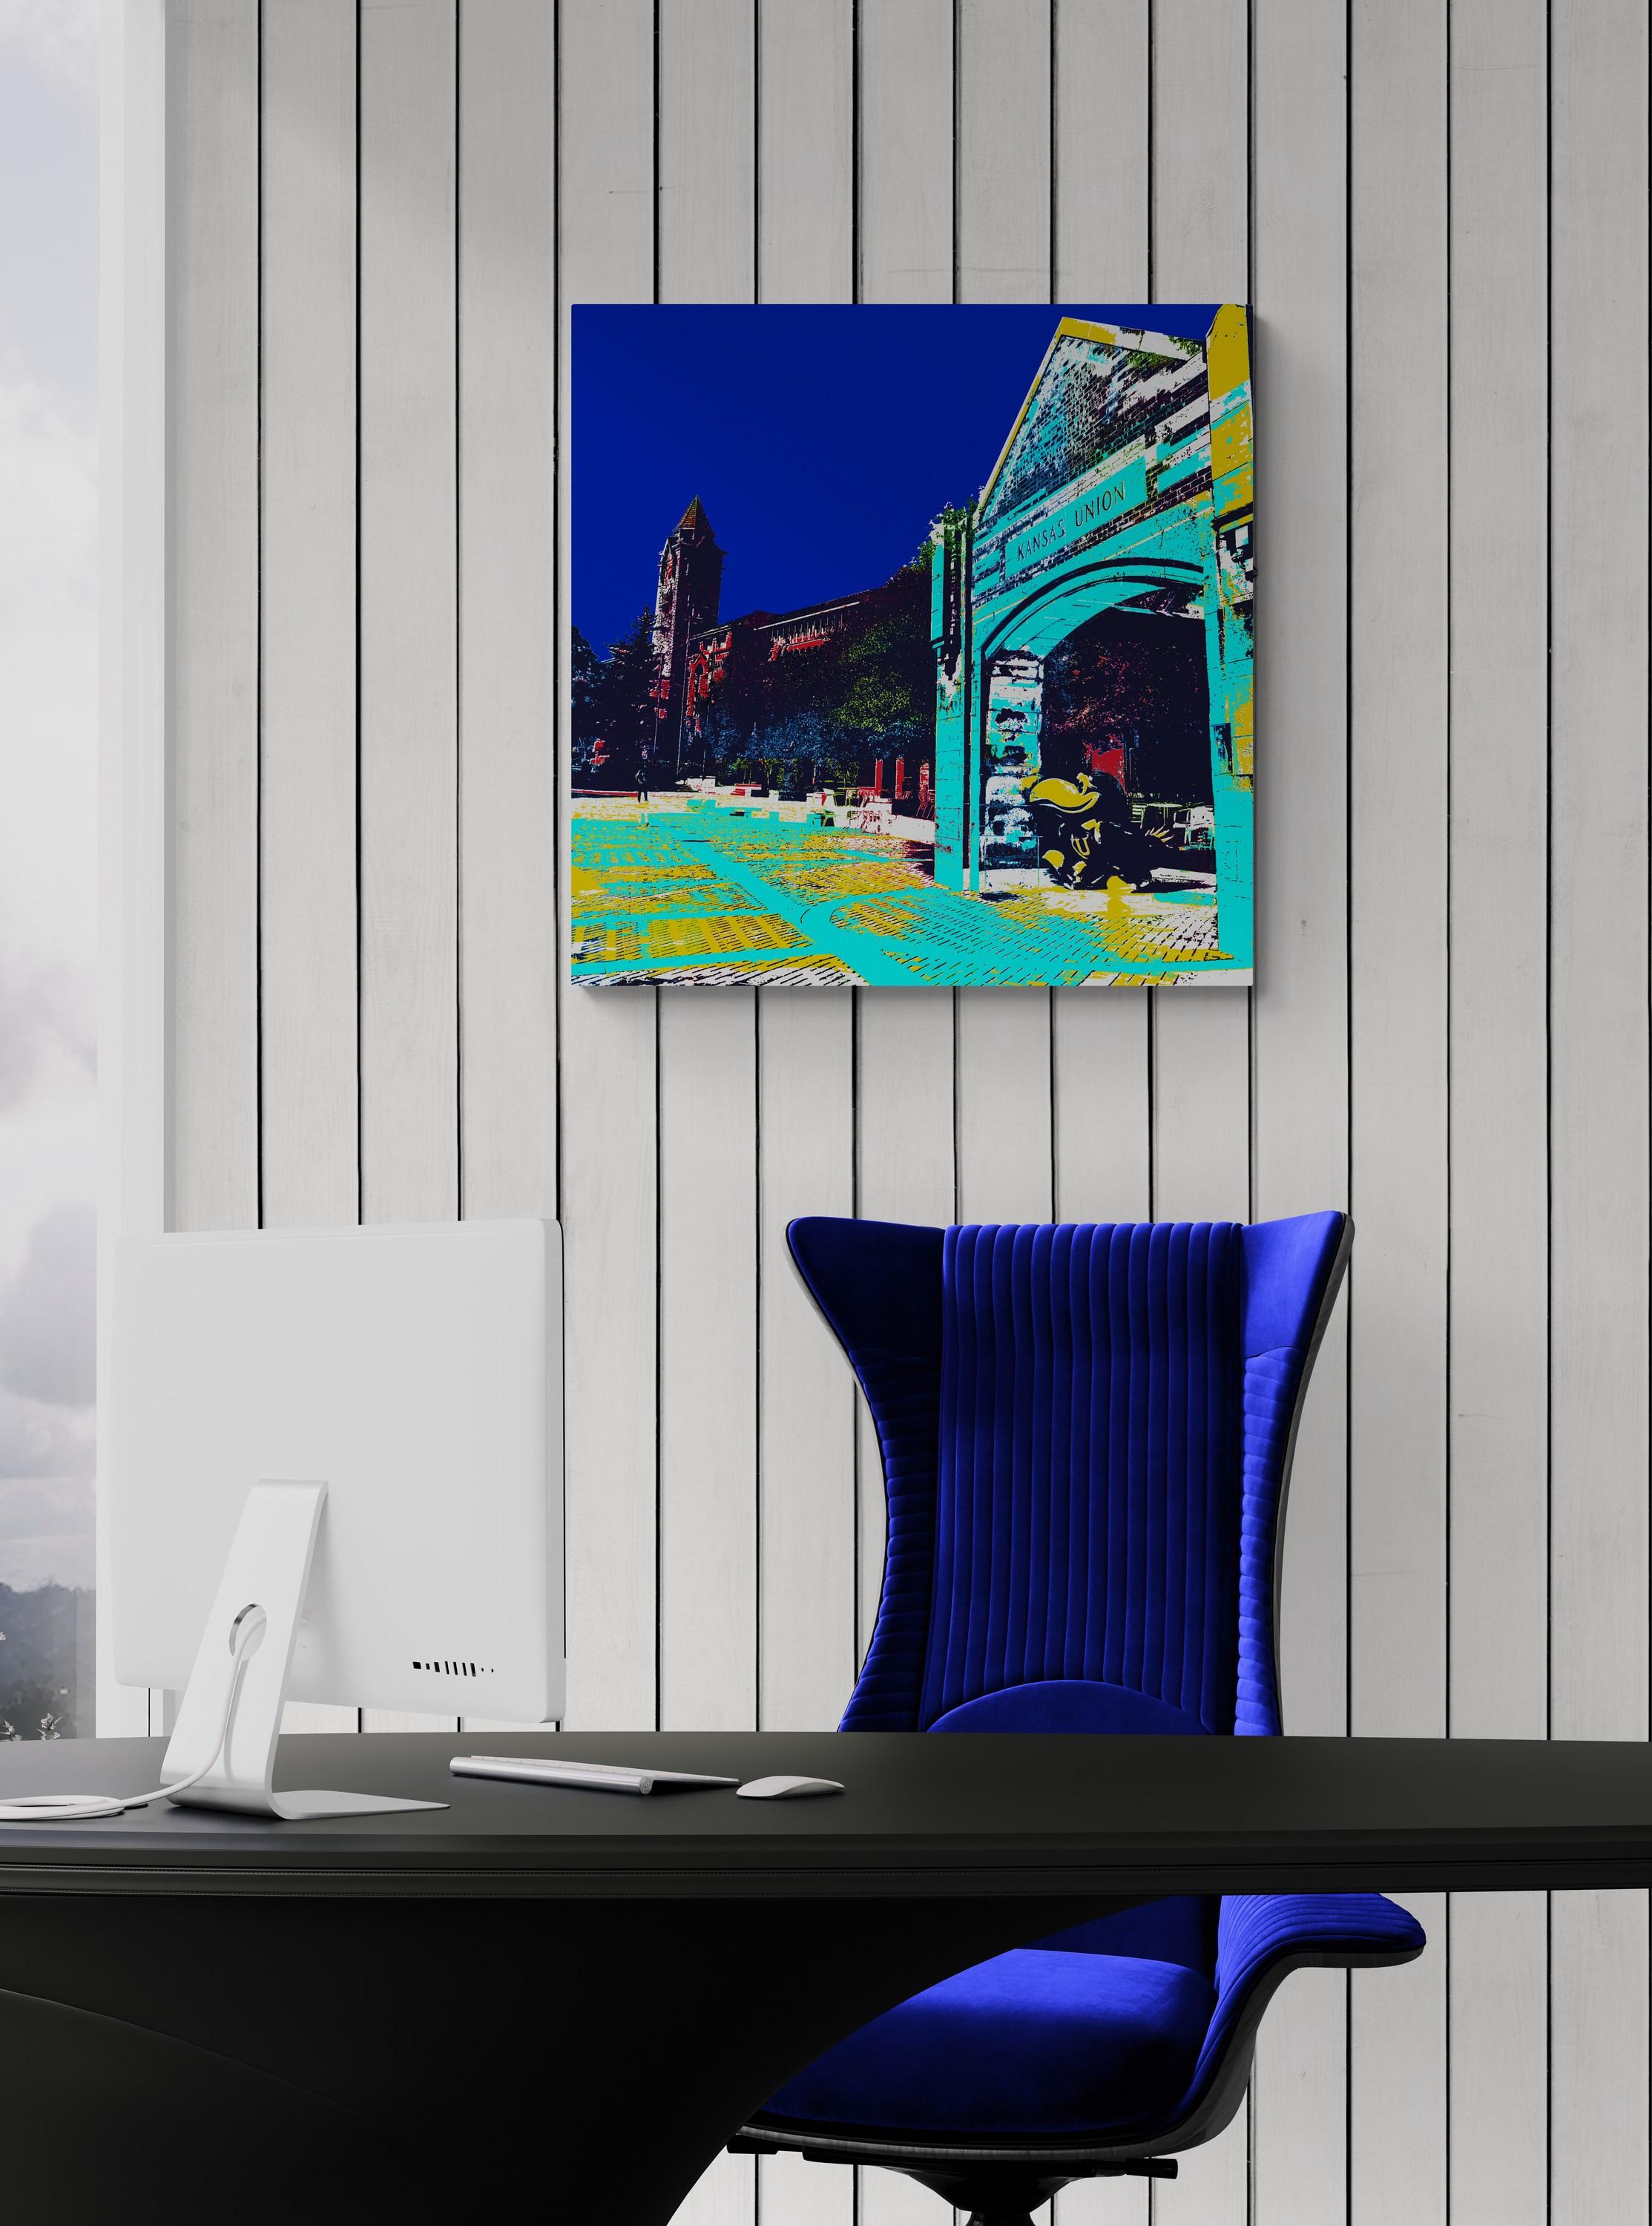 Katrina Revenaugh
“KU Student Union”
Dye Sublimation Print on Aluminum, 2024
Size Options: 12 x 12 inches, 20 x 20 inches or 30 x 30 inches
Edition: 75 + AP
Signed and titled on label provided separately
COA included

Tags: #ArtisticExpression